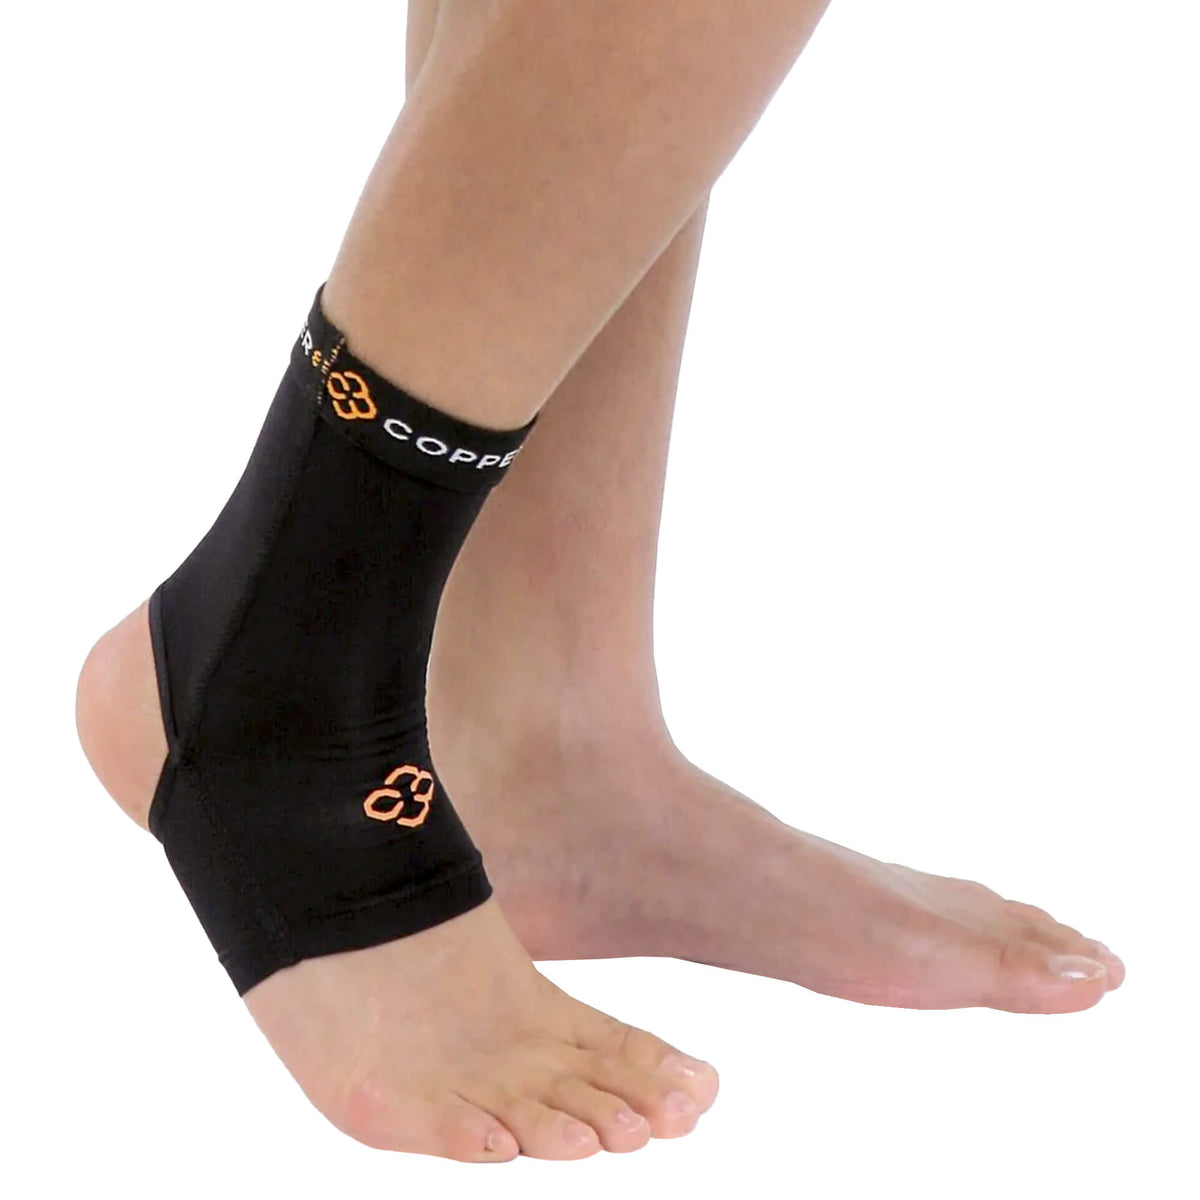 Copper88 Ankle Compression Sleeve for Muscle Support